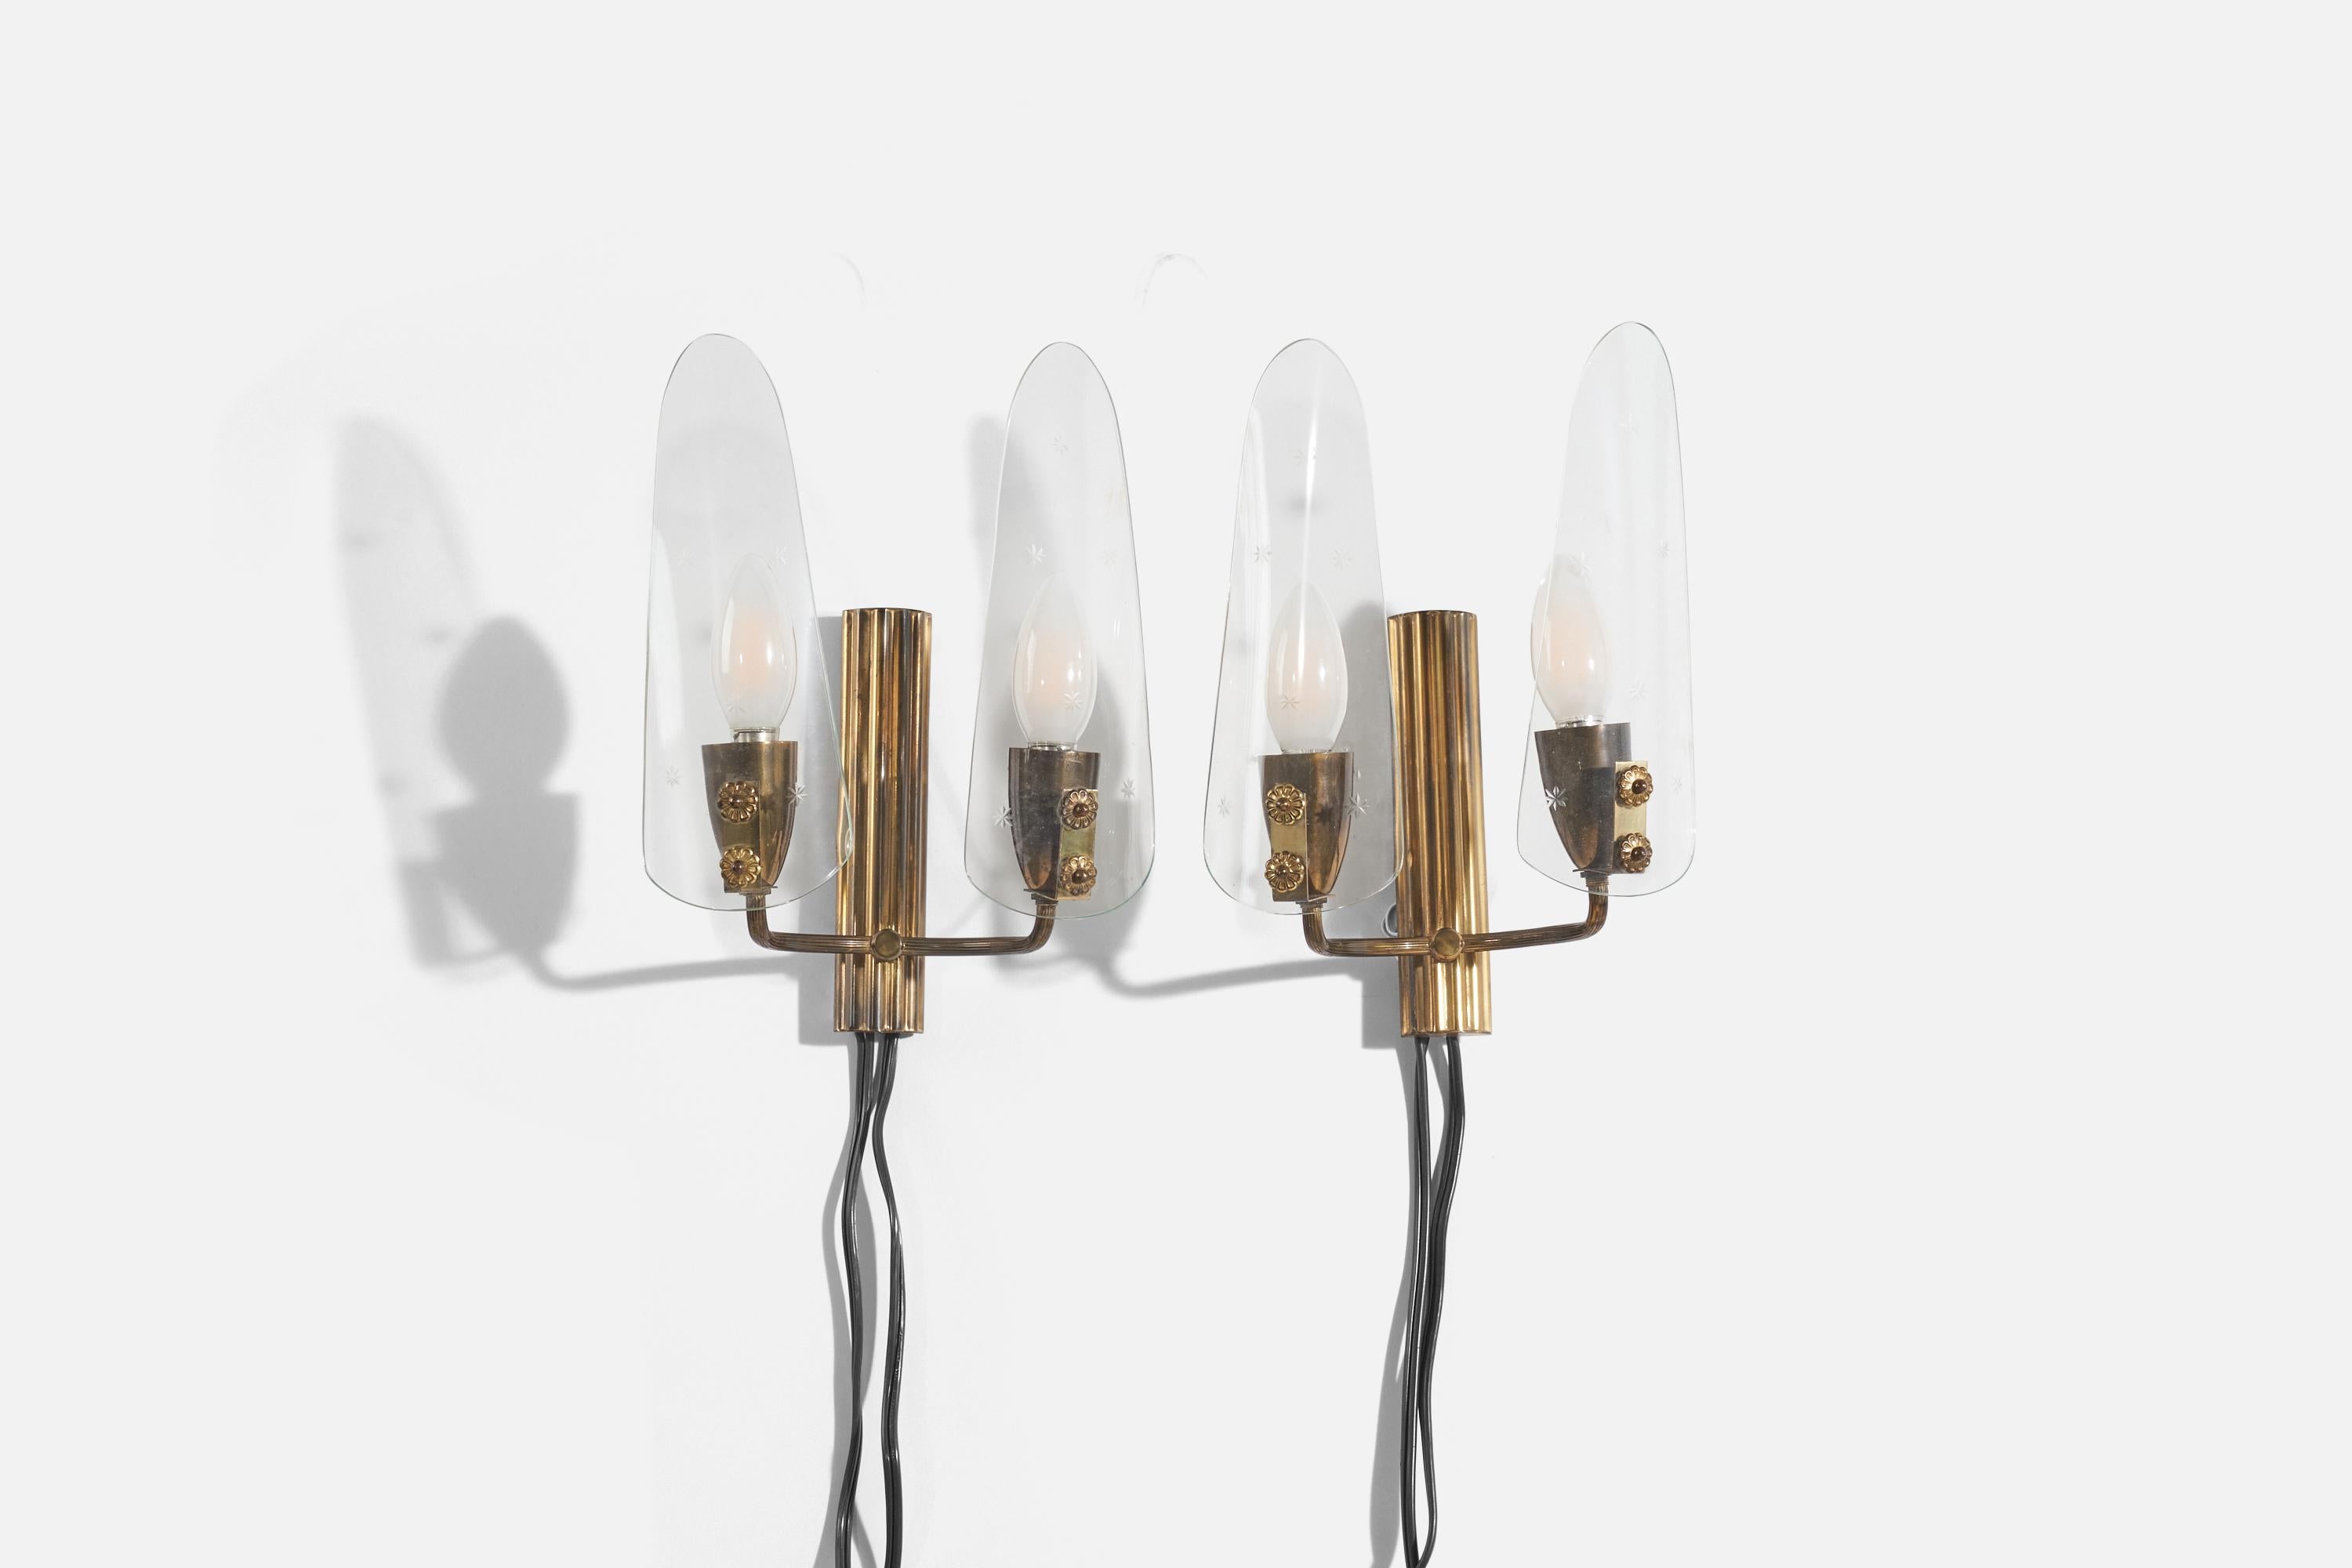 A pair of brass wall lights designed and produced by an Italian designer, Italy, 1950s.